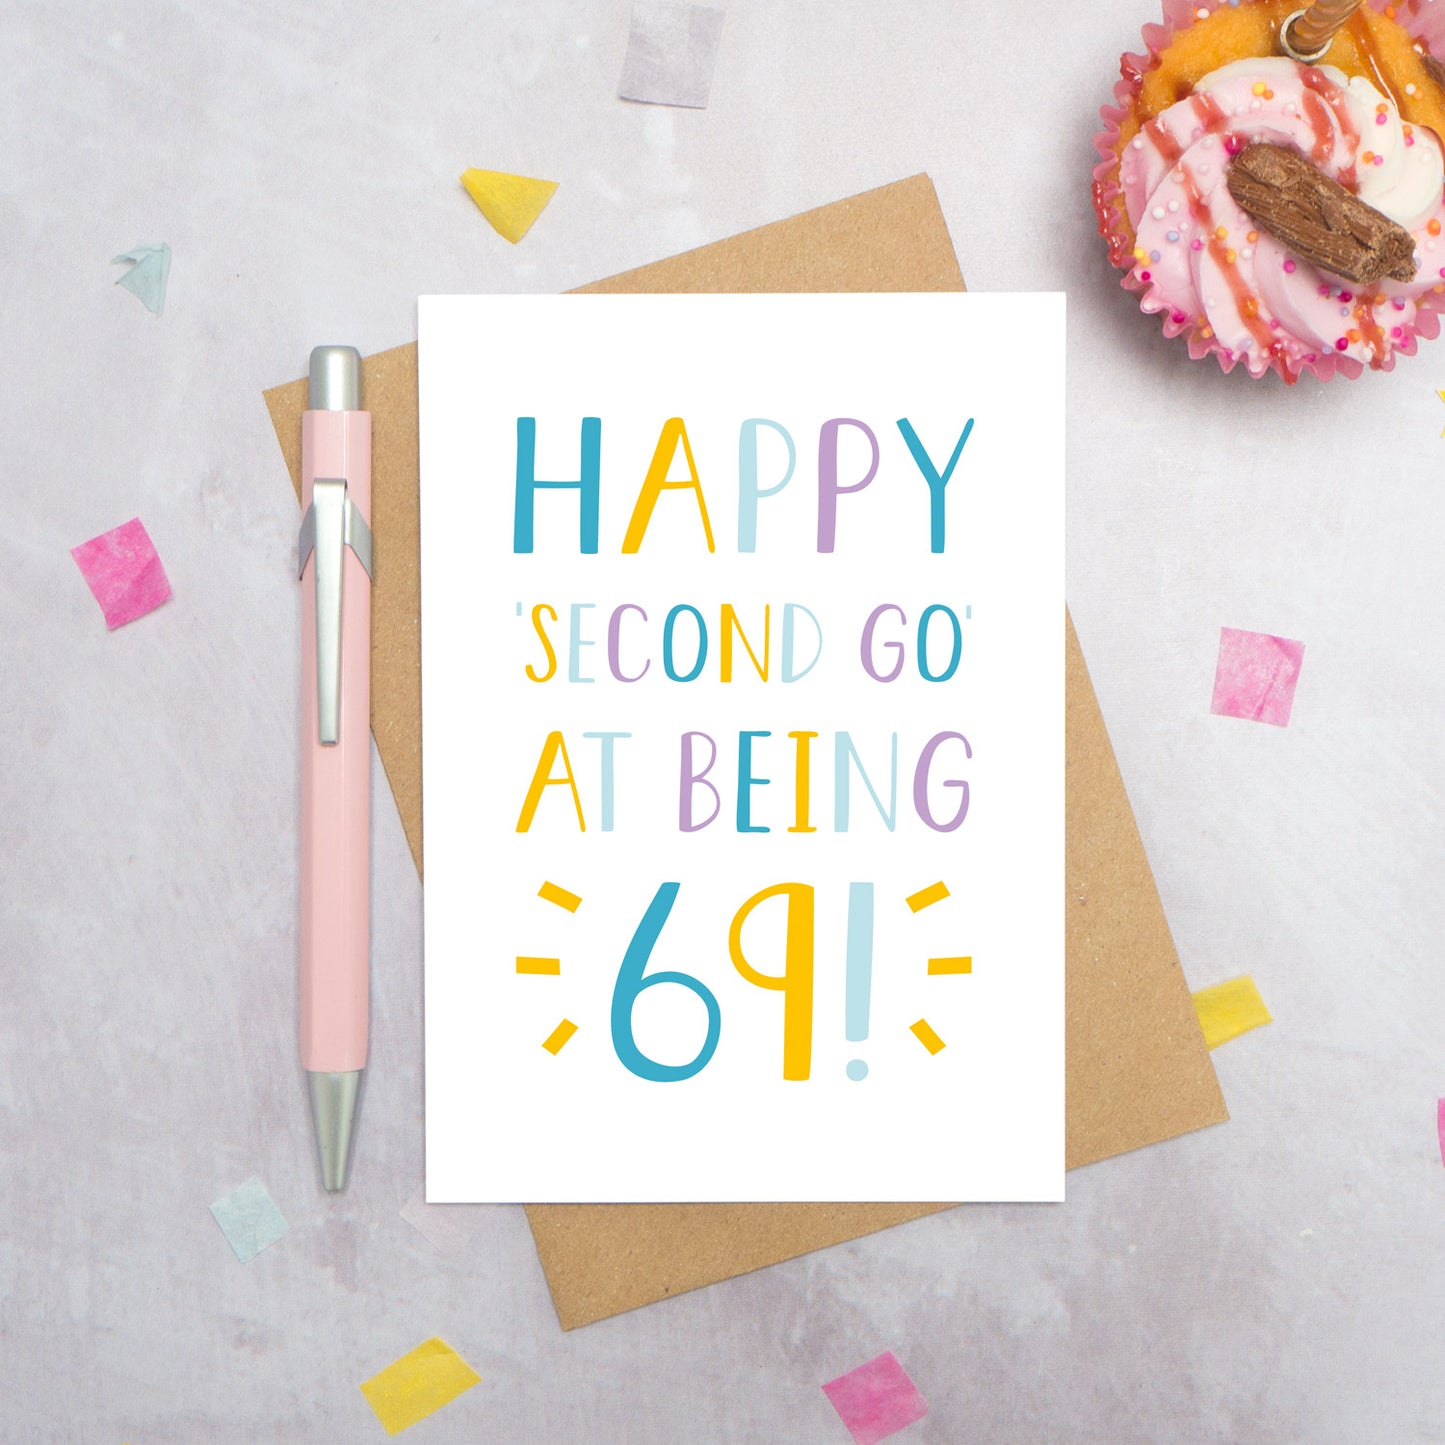 Happy second go at being 69 - milestone age card in blue, yellow and purple photographed on a grey background surrounded by a cupcake, pen and confetti.